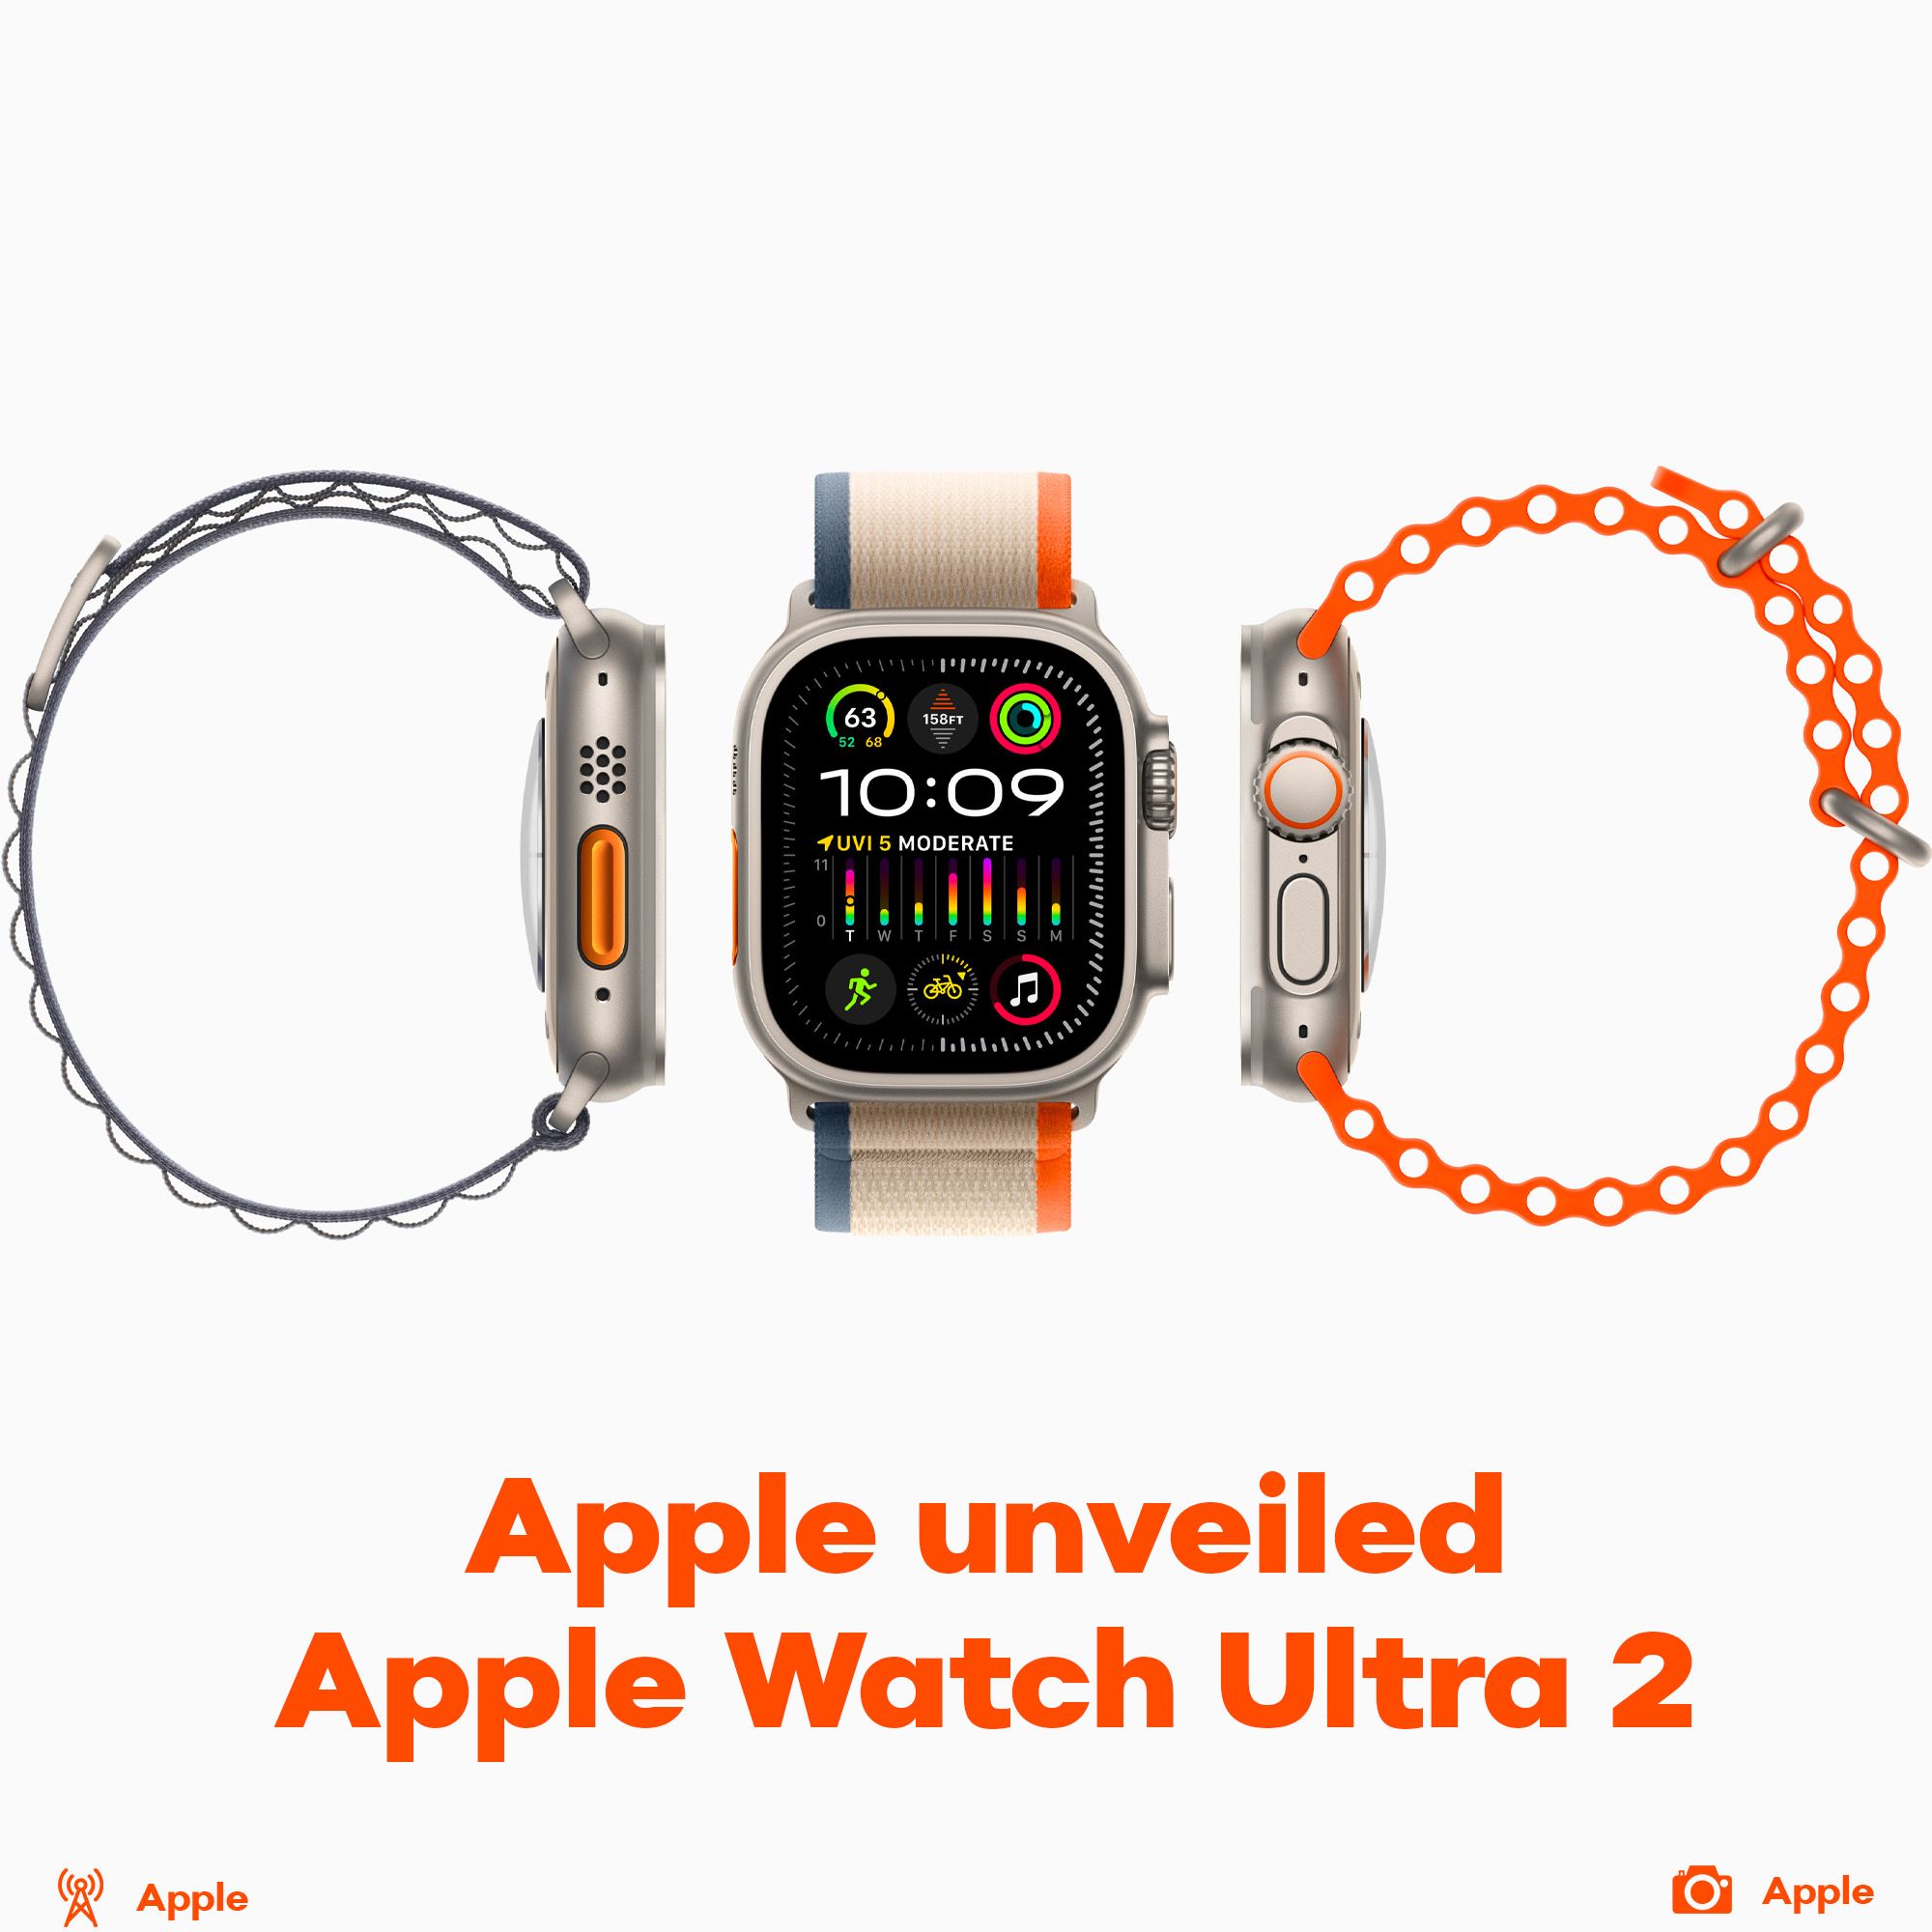 Apple Watch Ultra 2 unveiled